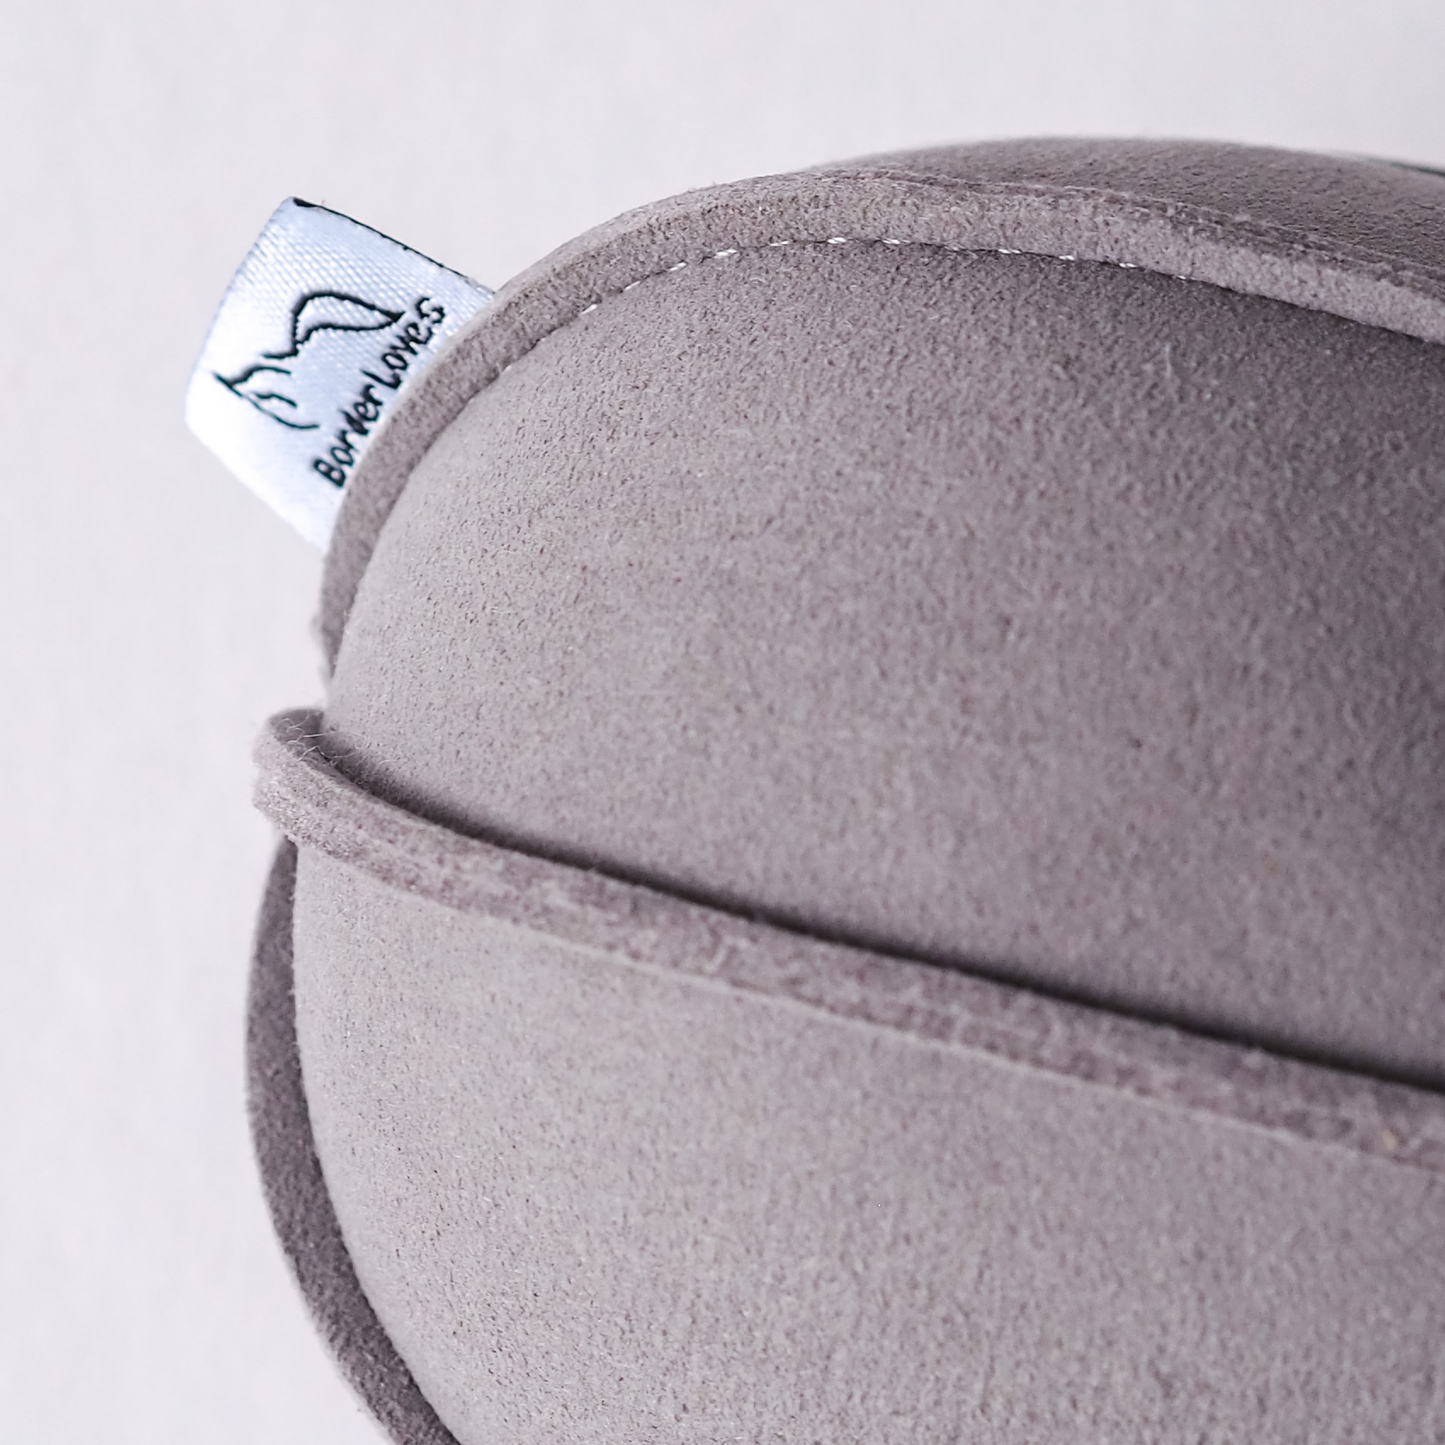 Close up of logo label on side of Grey Indoor Suede Ball